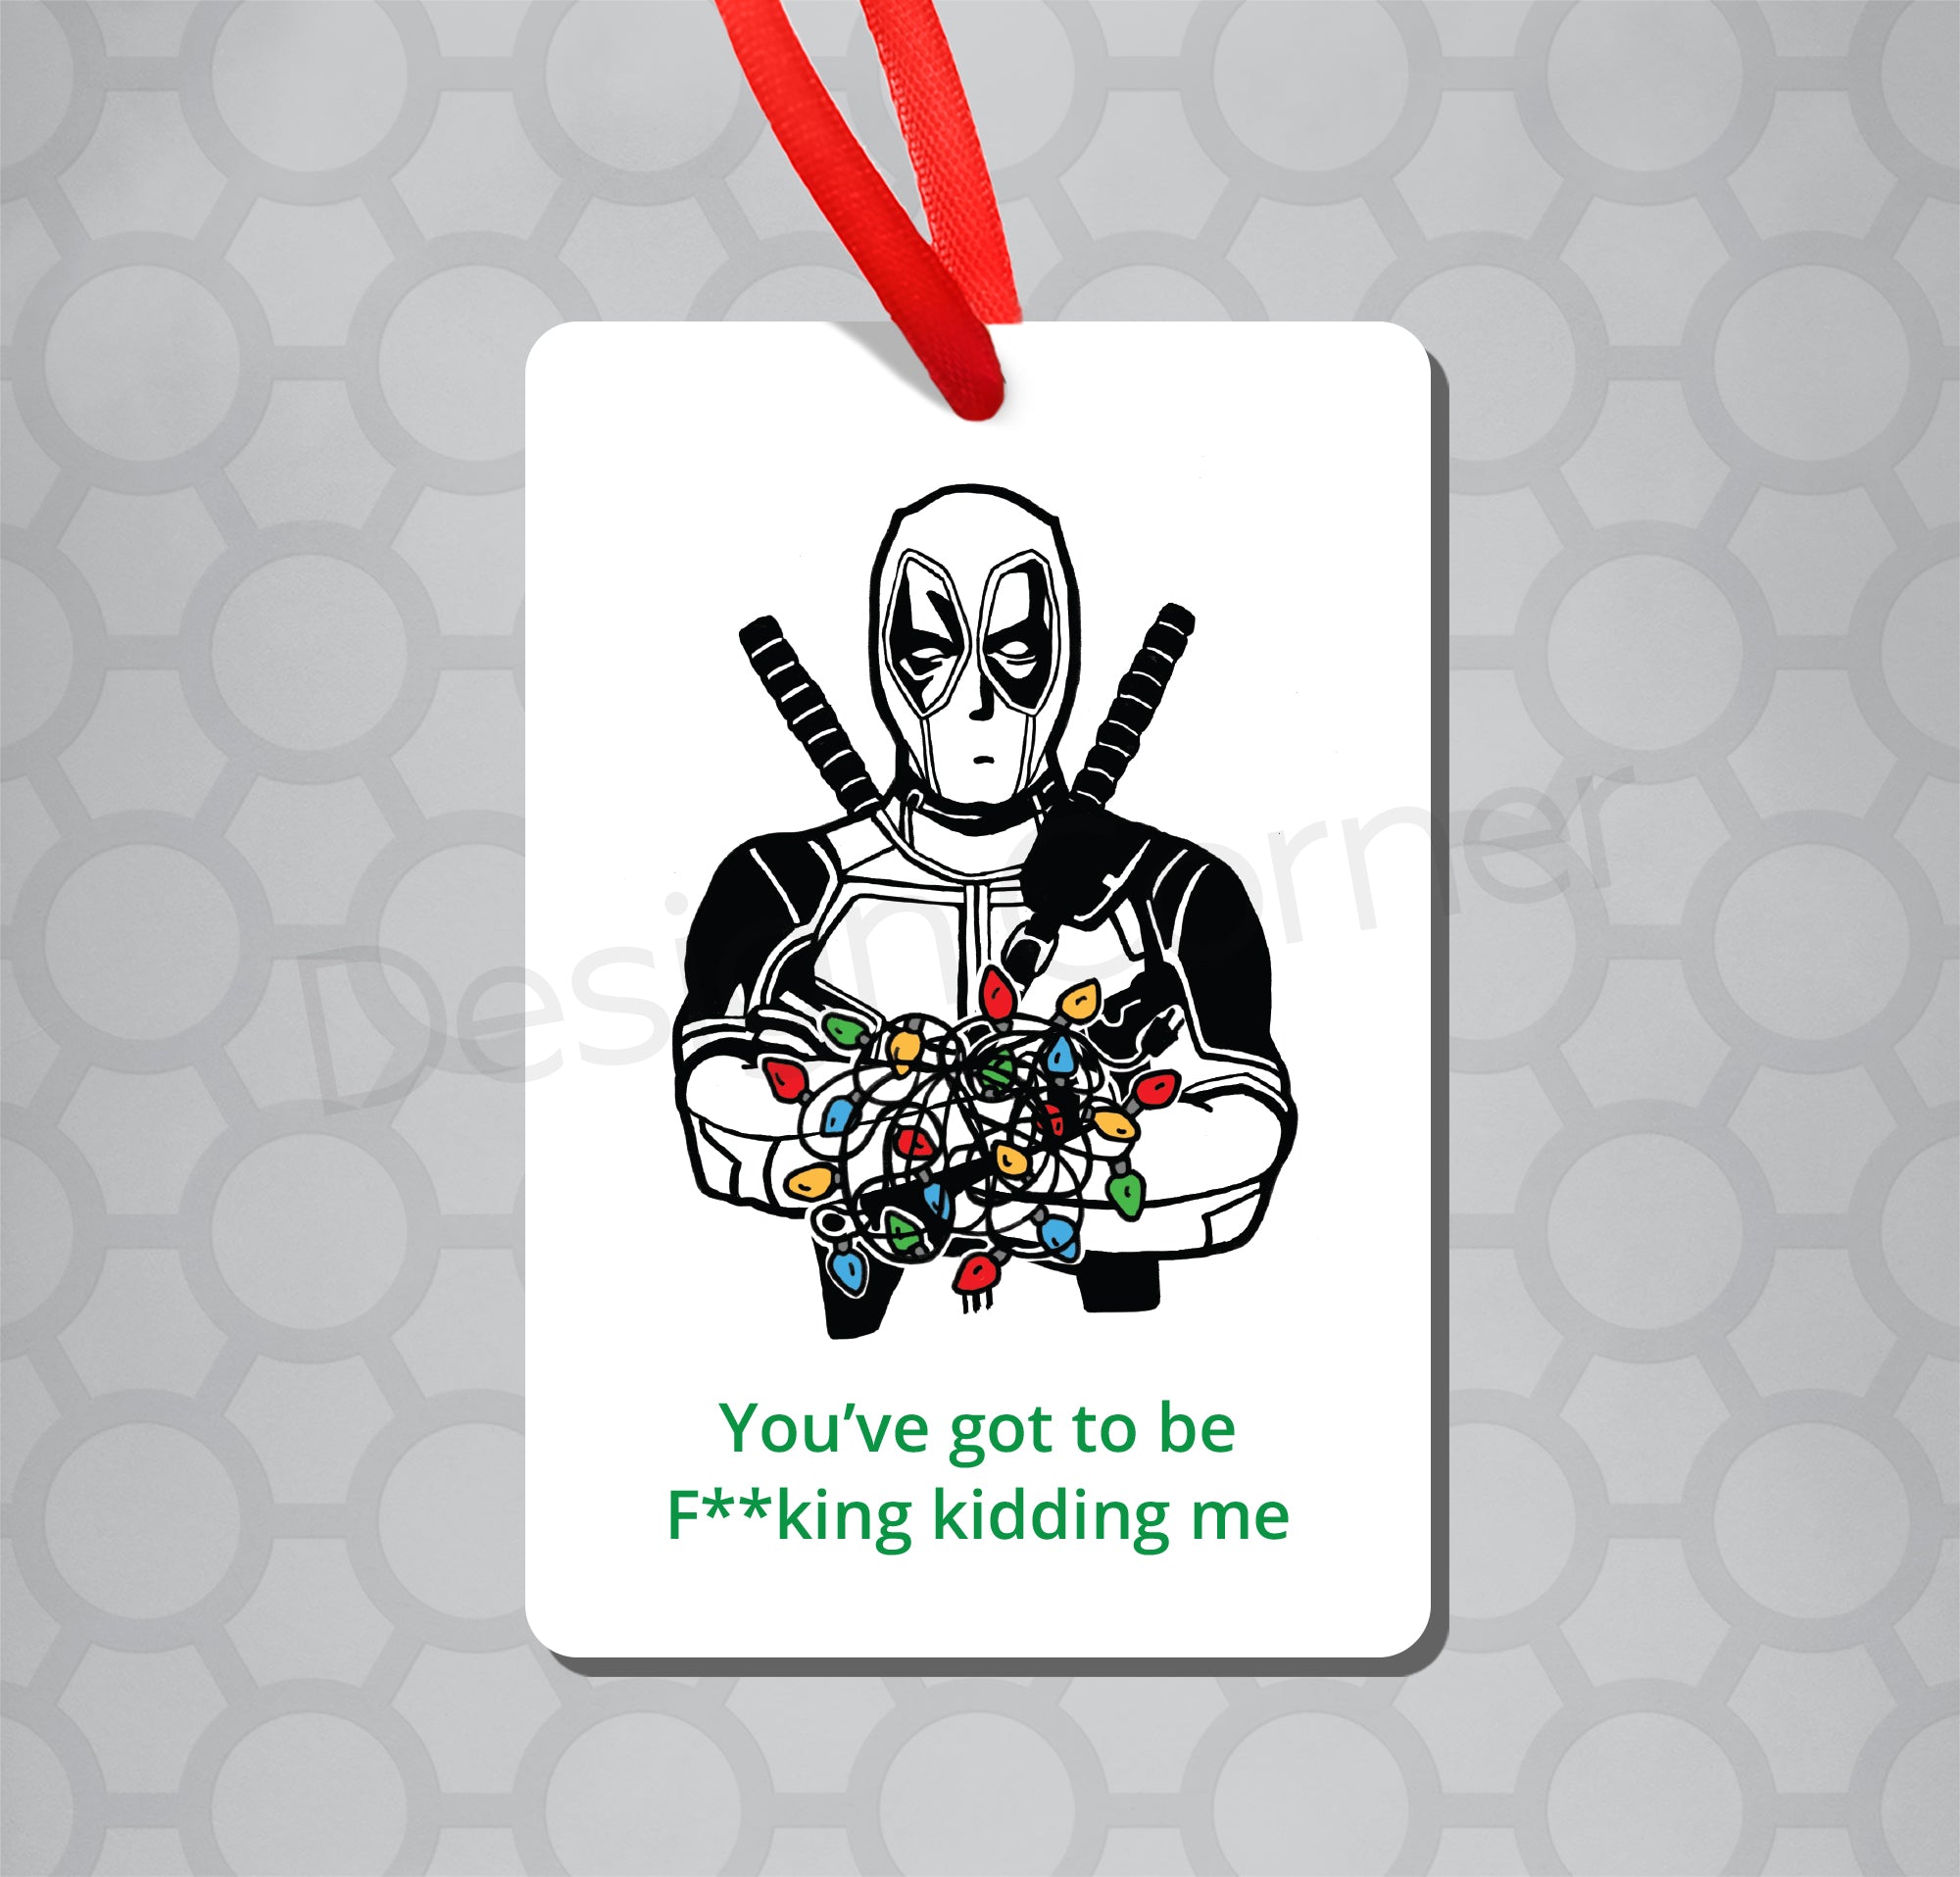 Illustration of Marvel's Deadpool with tangled christmas lights on Magnet ornament with caption You've got to be F**cking kidding me.